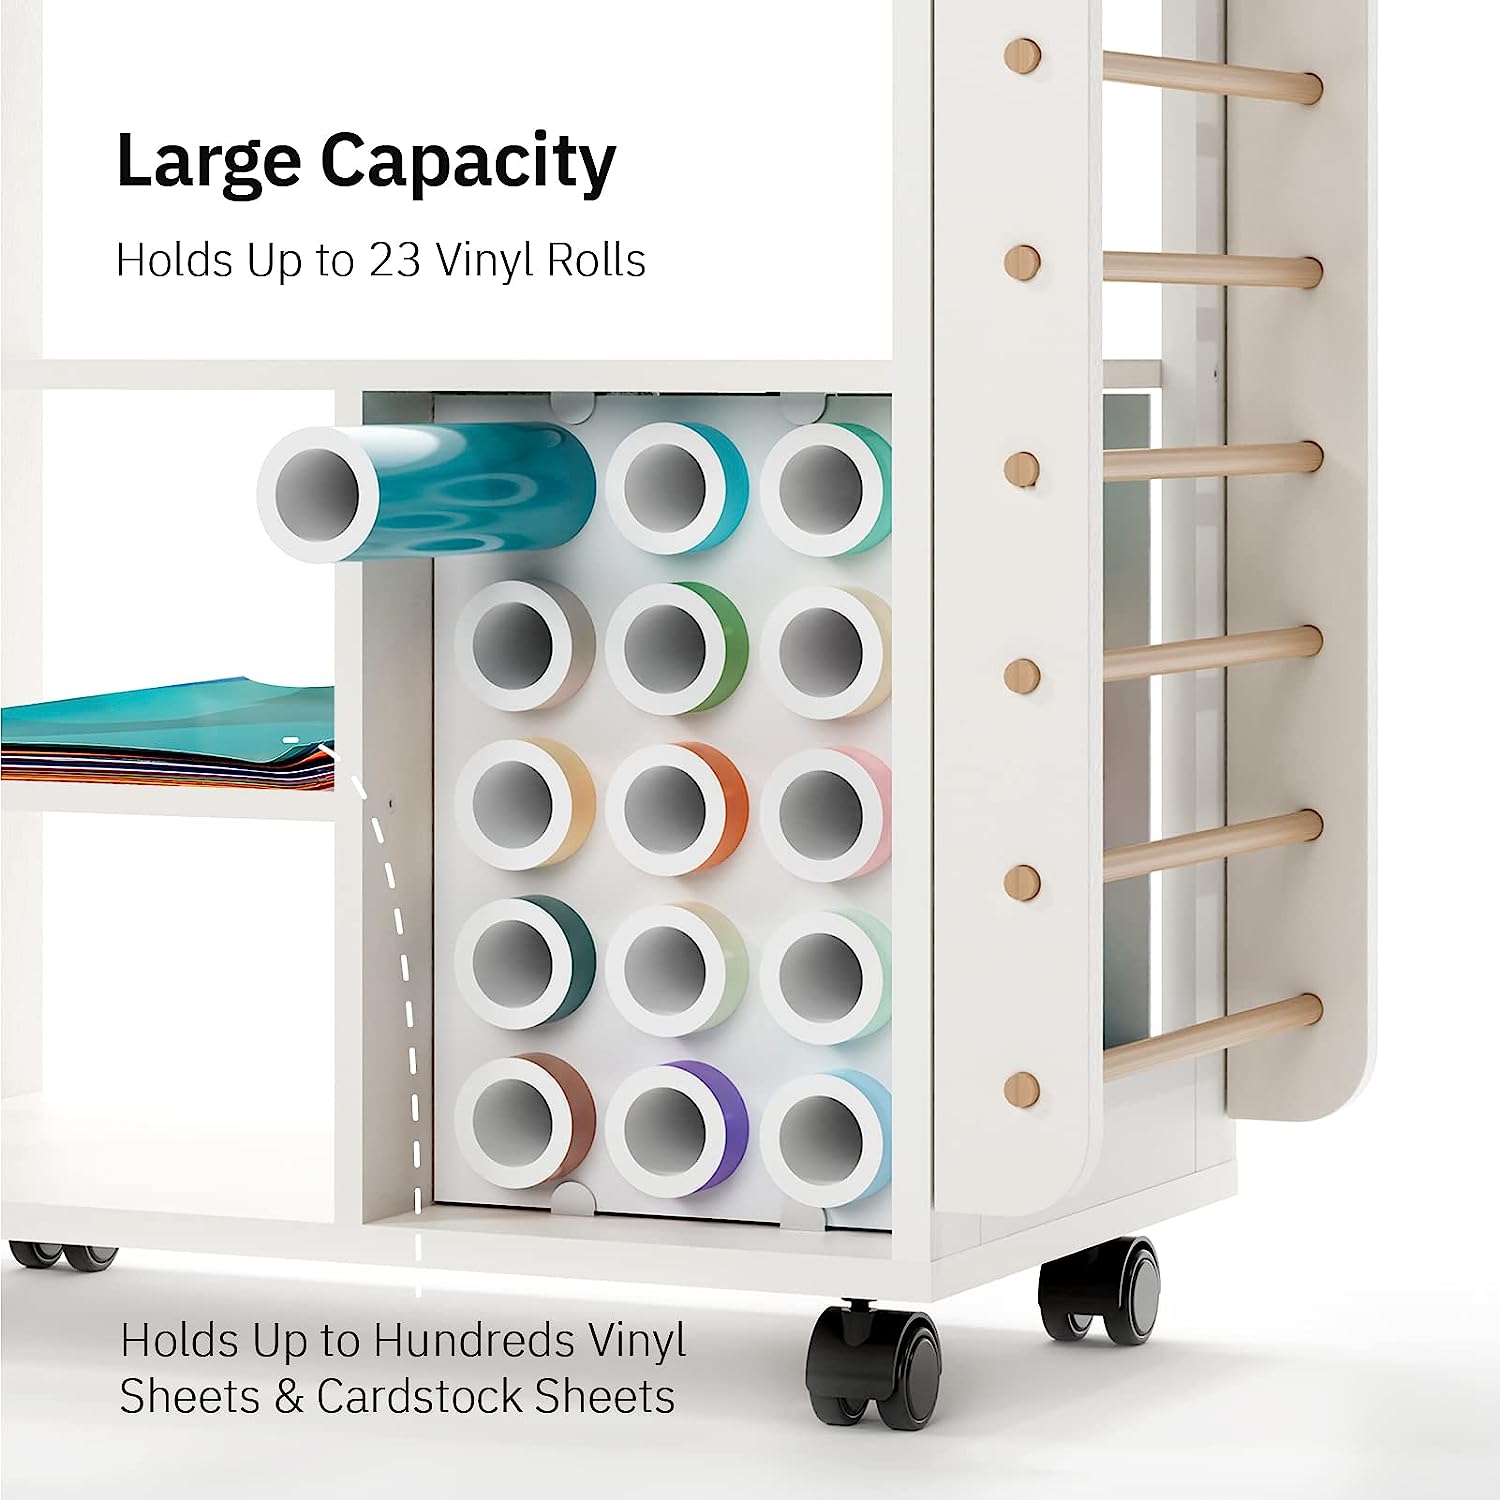 Organization and Storage Cart Compatible with Cricut Machine, Rolling Craft Storage Organizer with Vinyl Roll Holder, Crafting Cabinet Table Workstation for Craft Room Home - Compact Removable - image 5 of 7